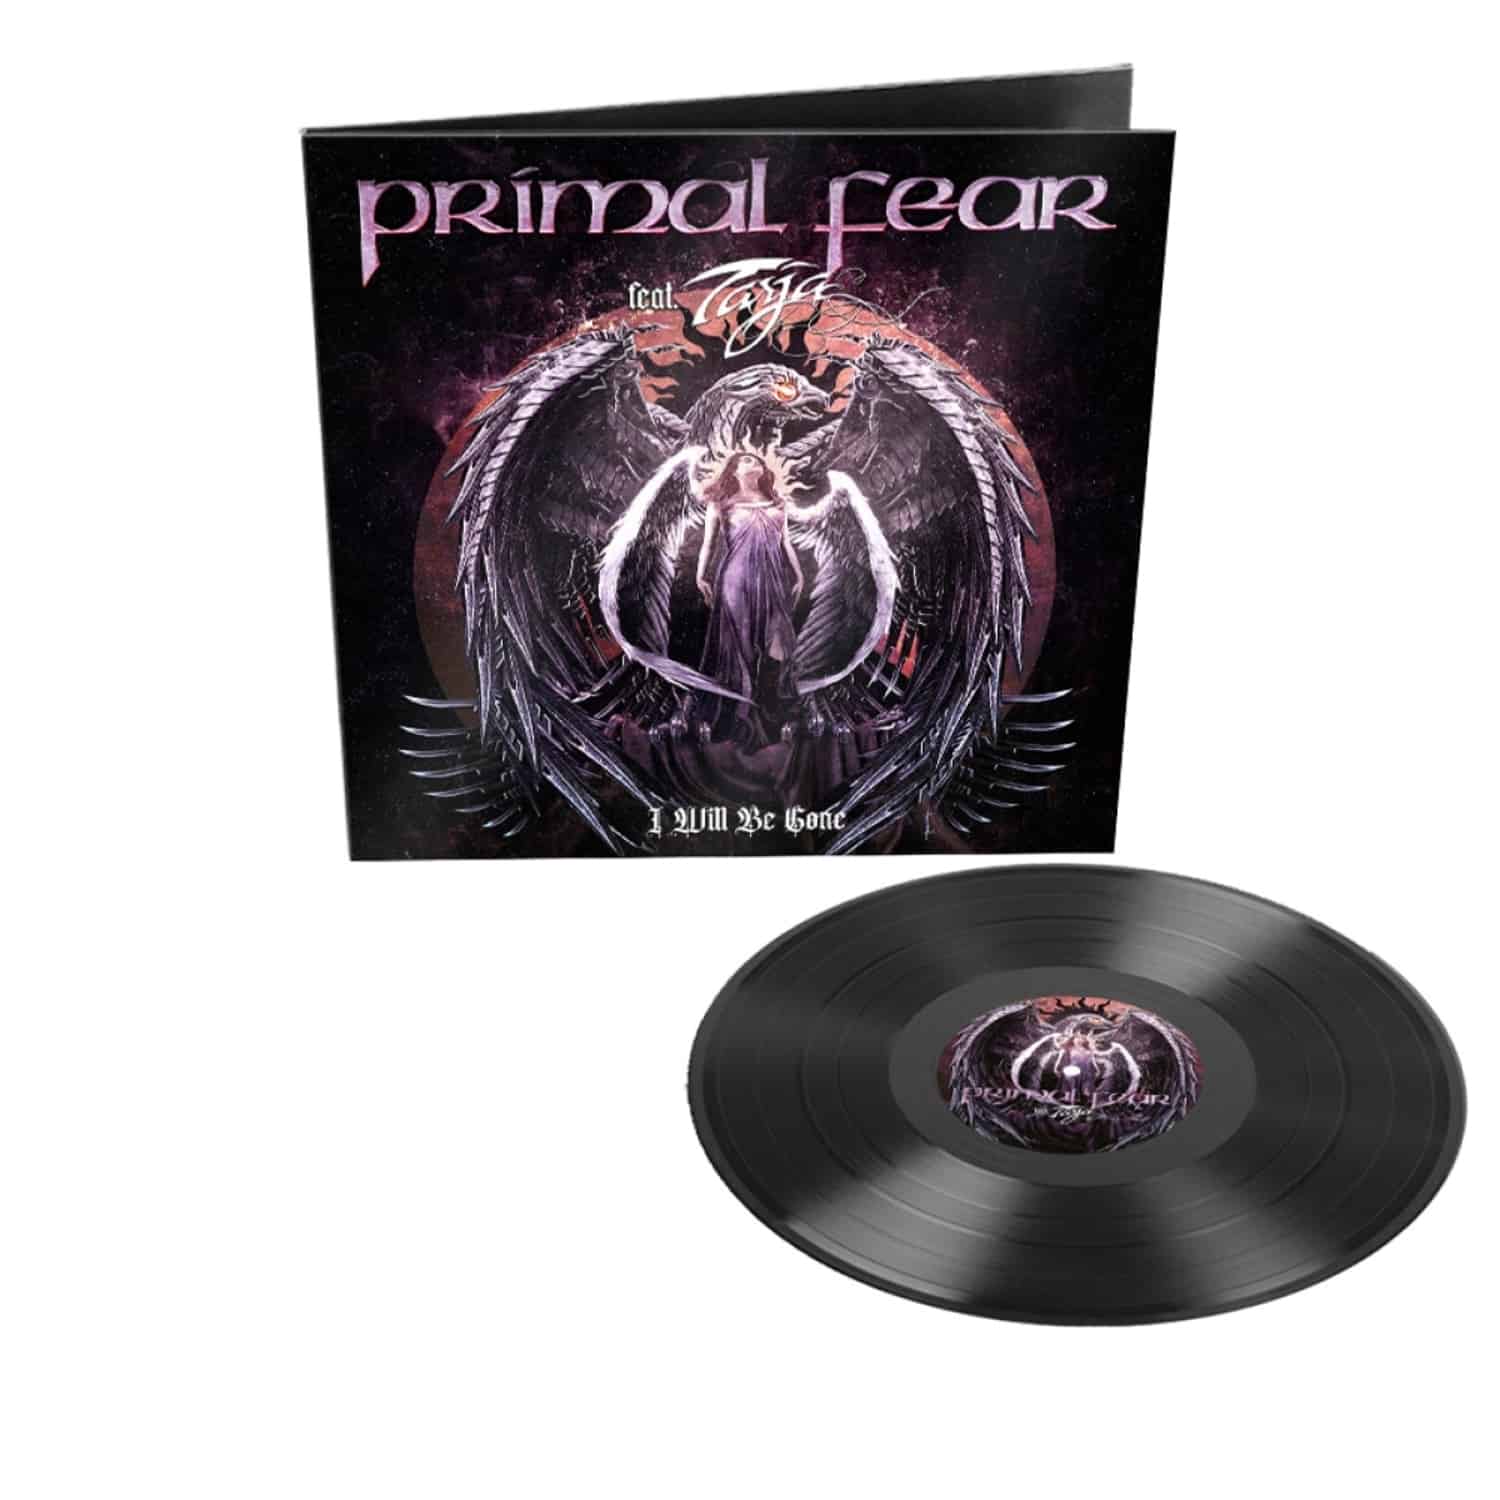 Primal Fear - I WILL BE GONE 